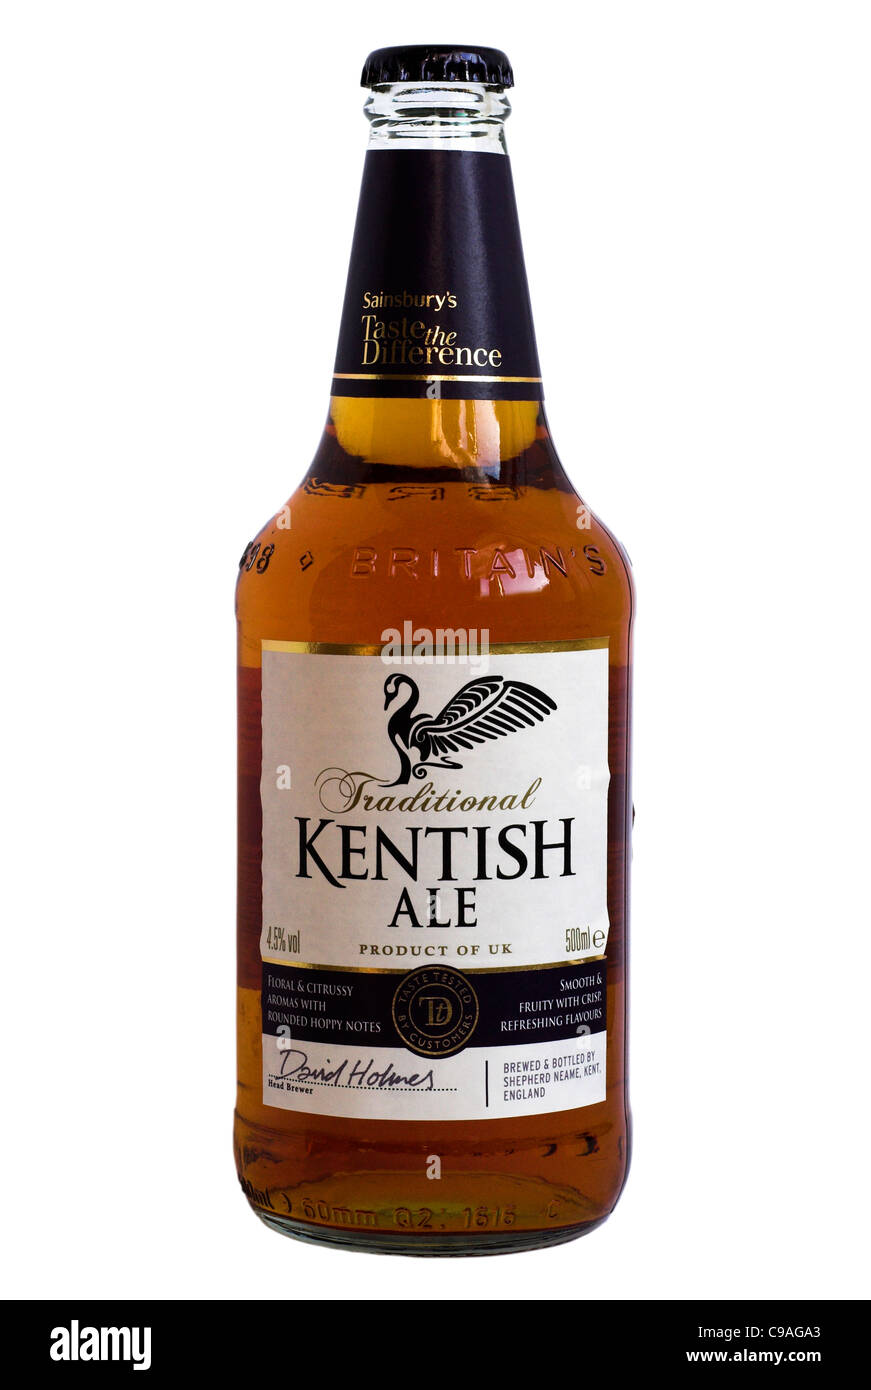 Shepherd Neame Brewery Kentish Ale beer bottle - current @ 2011 for Sainsbury's Supermarket. Stock Photo